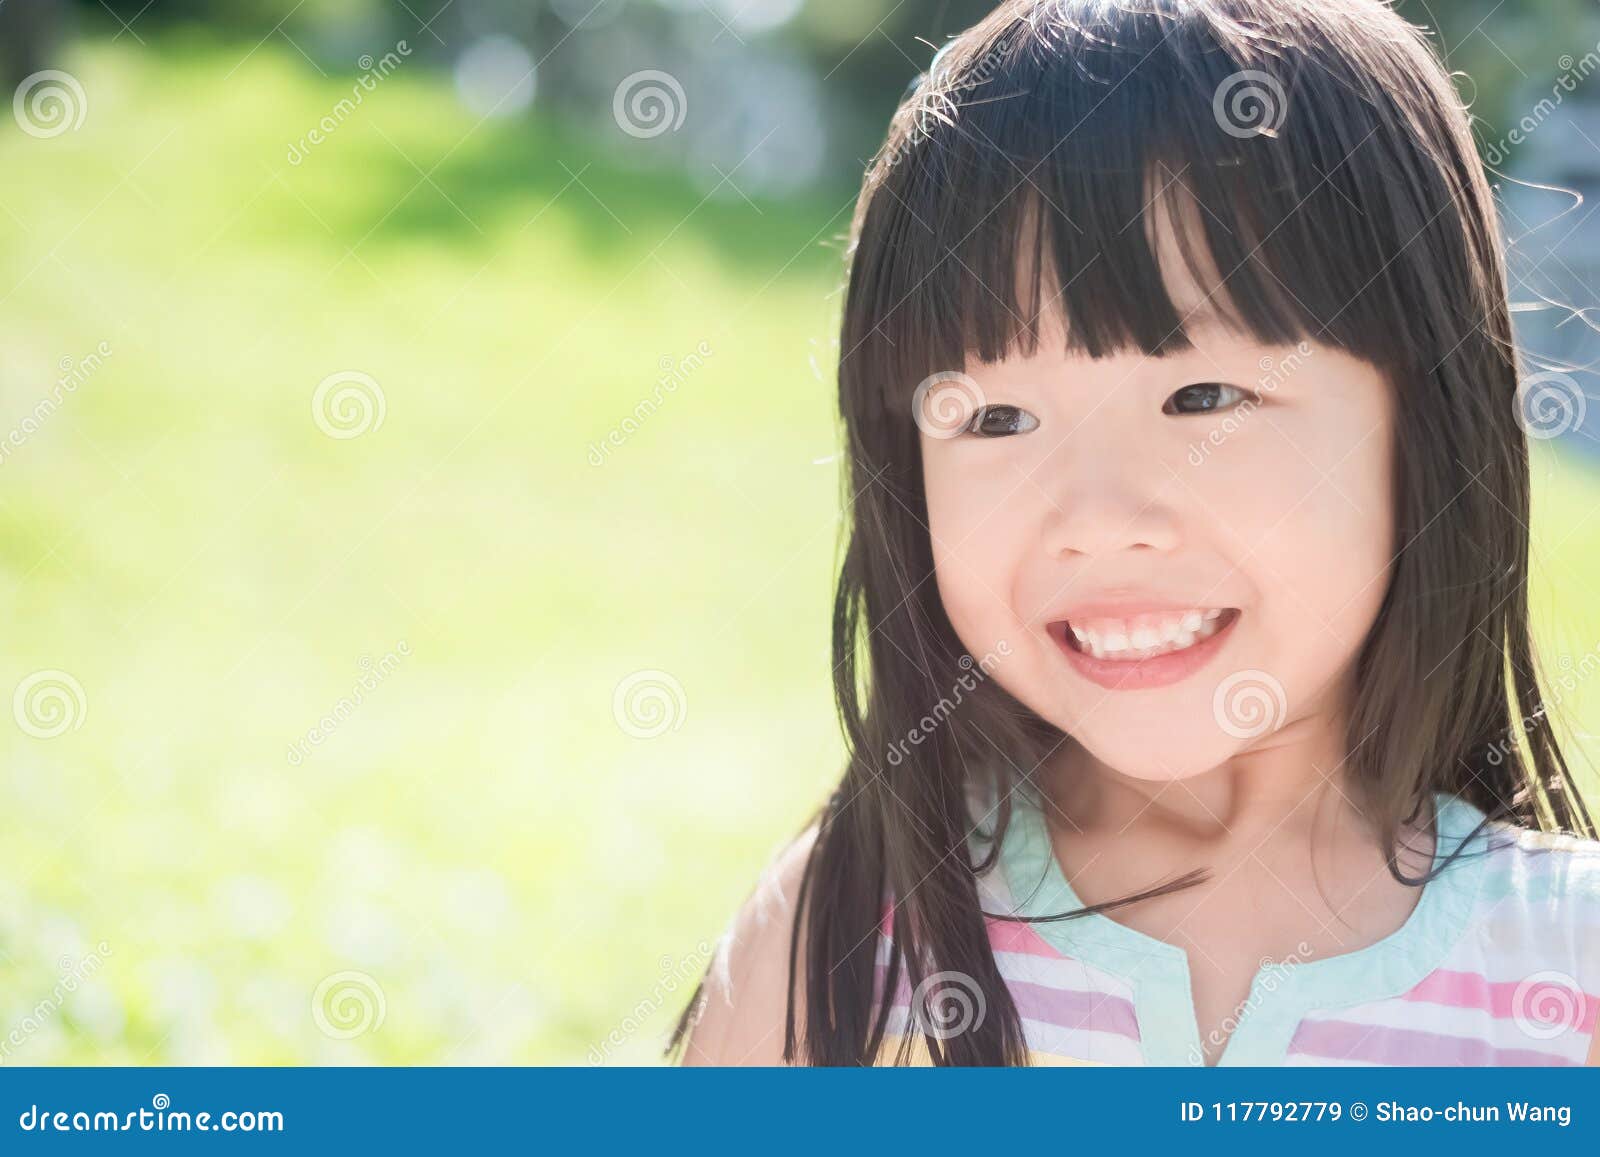 Cute smile happily stock image. Image of copy, thoughtful - 117792779